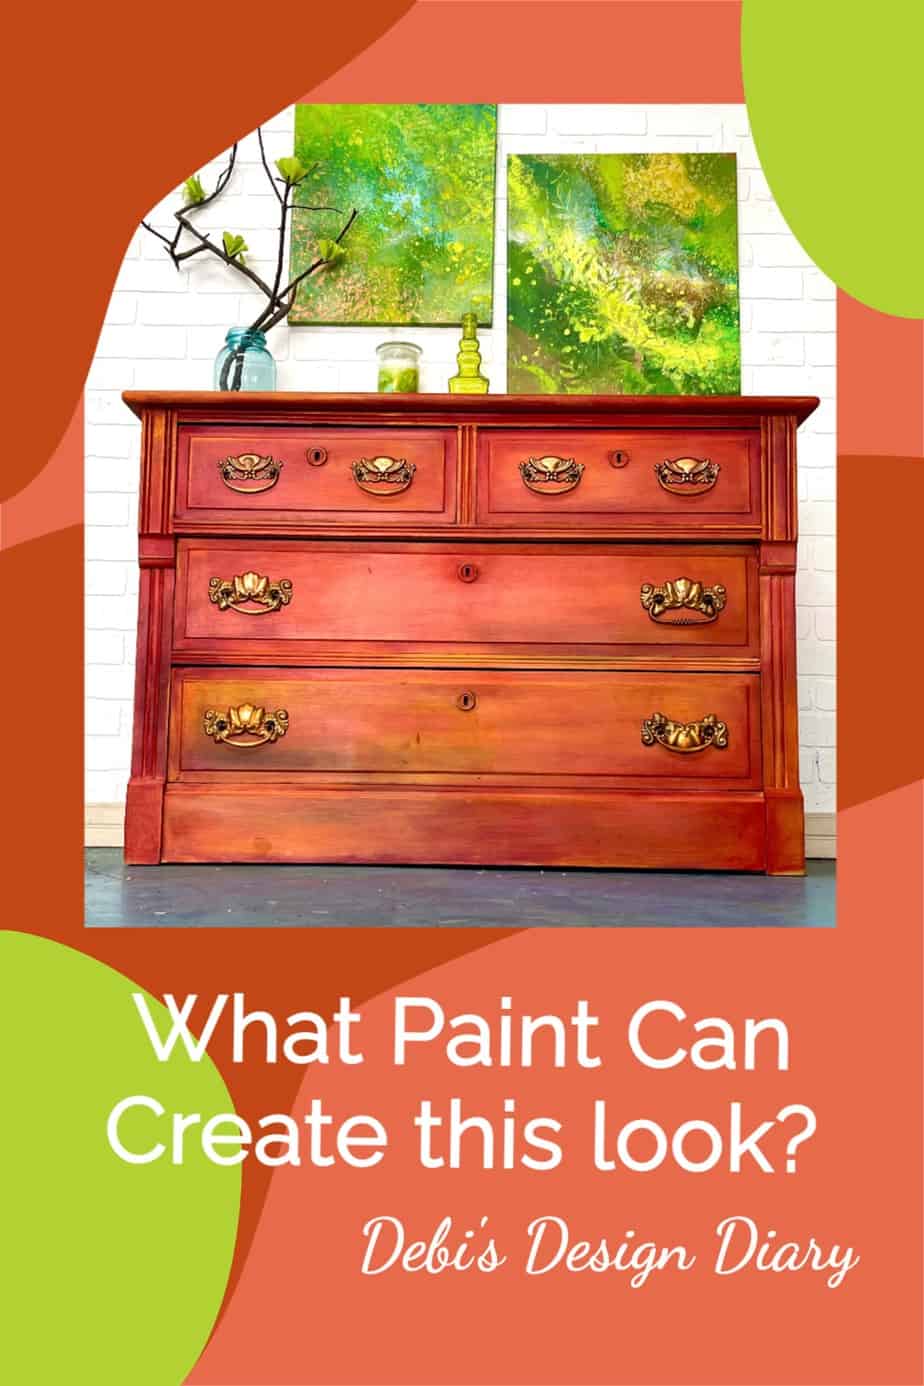 Debi’s Design Diary: How to Get an Amazing Layered Paint Finish